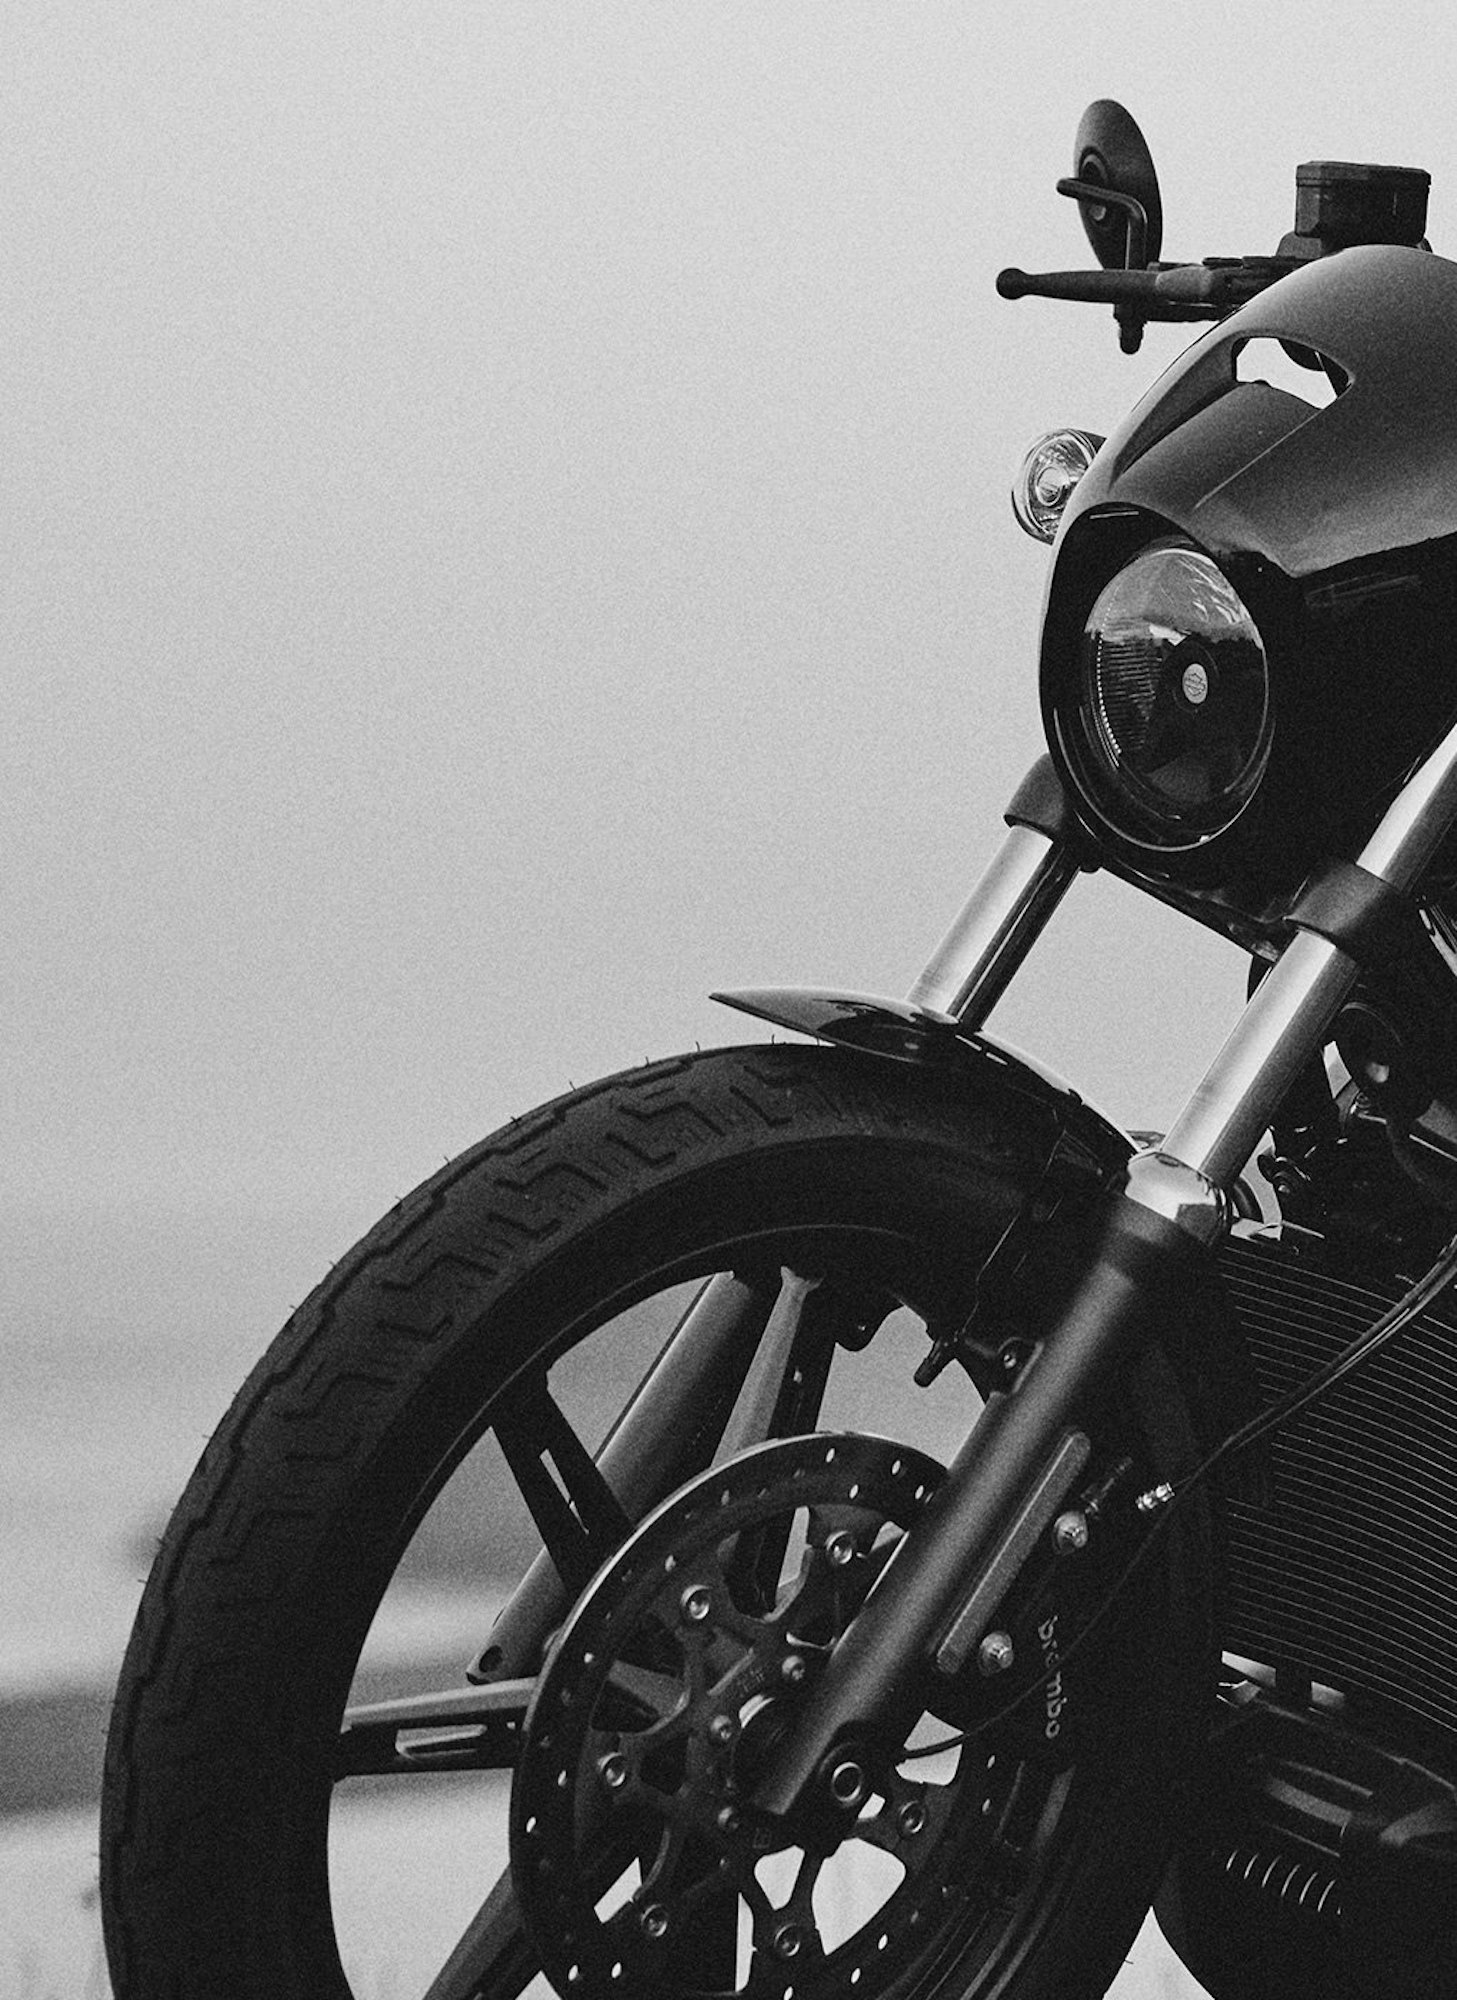 Harley-Davidson's Nightster, which could have an 'S' variant soon debuted in the new year. Media sourced from Harley-Davidson.